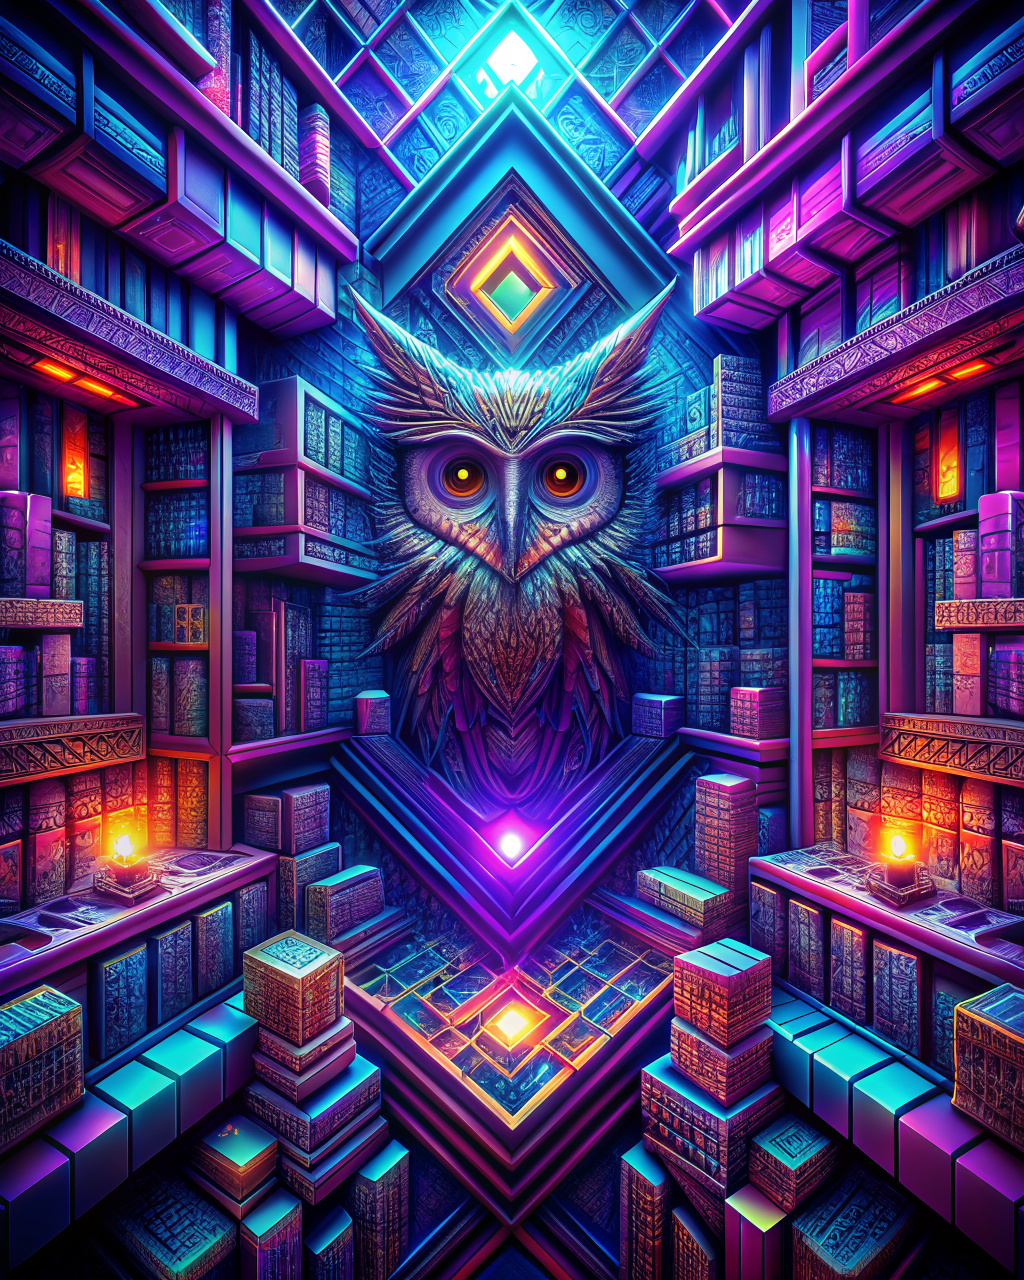 In the ancient library, a solemn owl perches quietly on the bookshelf, its presence akin to a symbol of wisdom. Surrounding this owl is an aura of profound wisdom, akin to a mist pervading between each ancient tome. The aged books on the shelves exude the scent of time, recording endless history and wisdom. In this quiet and mysterious atmosphere, time seems to flow silently, and every person who steps into this space cannot help but be immersed in it, drawn by the radiance of wisdom.